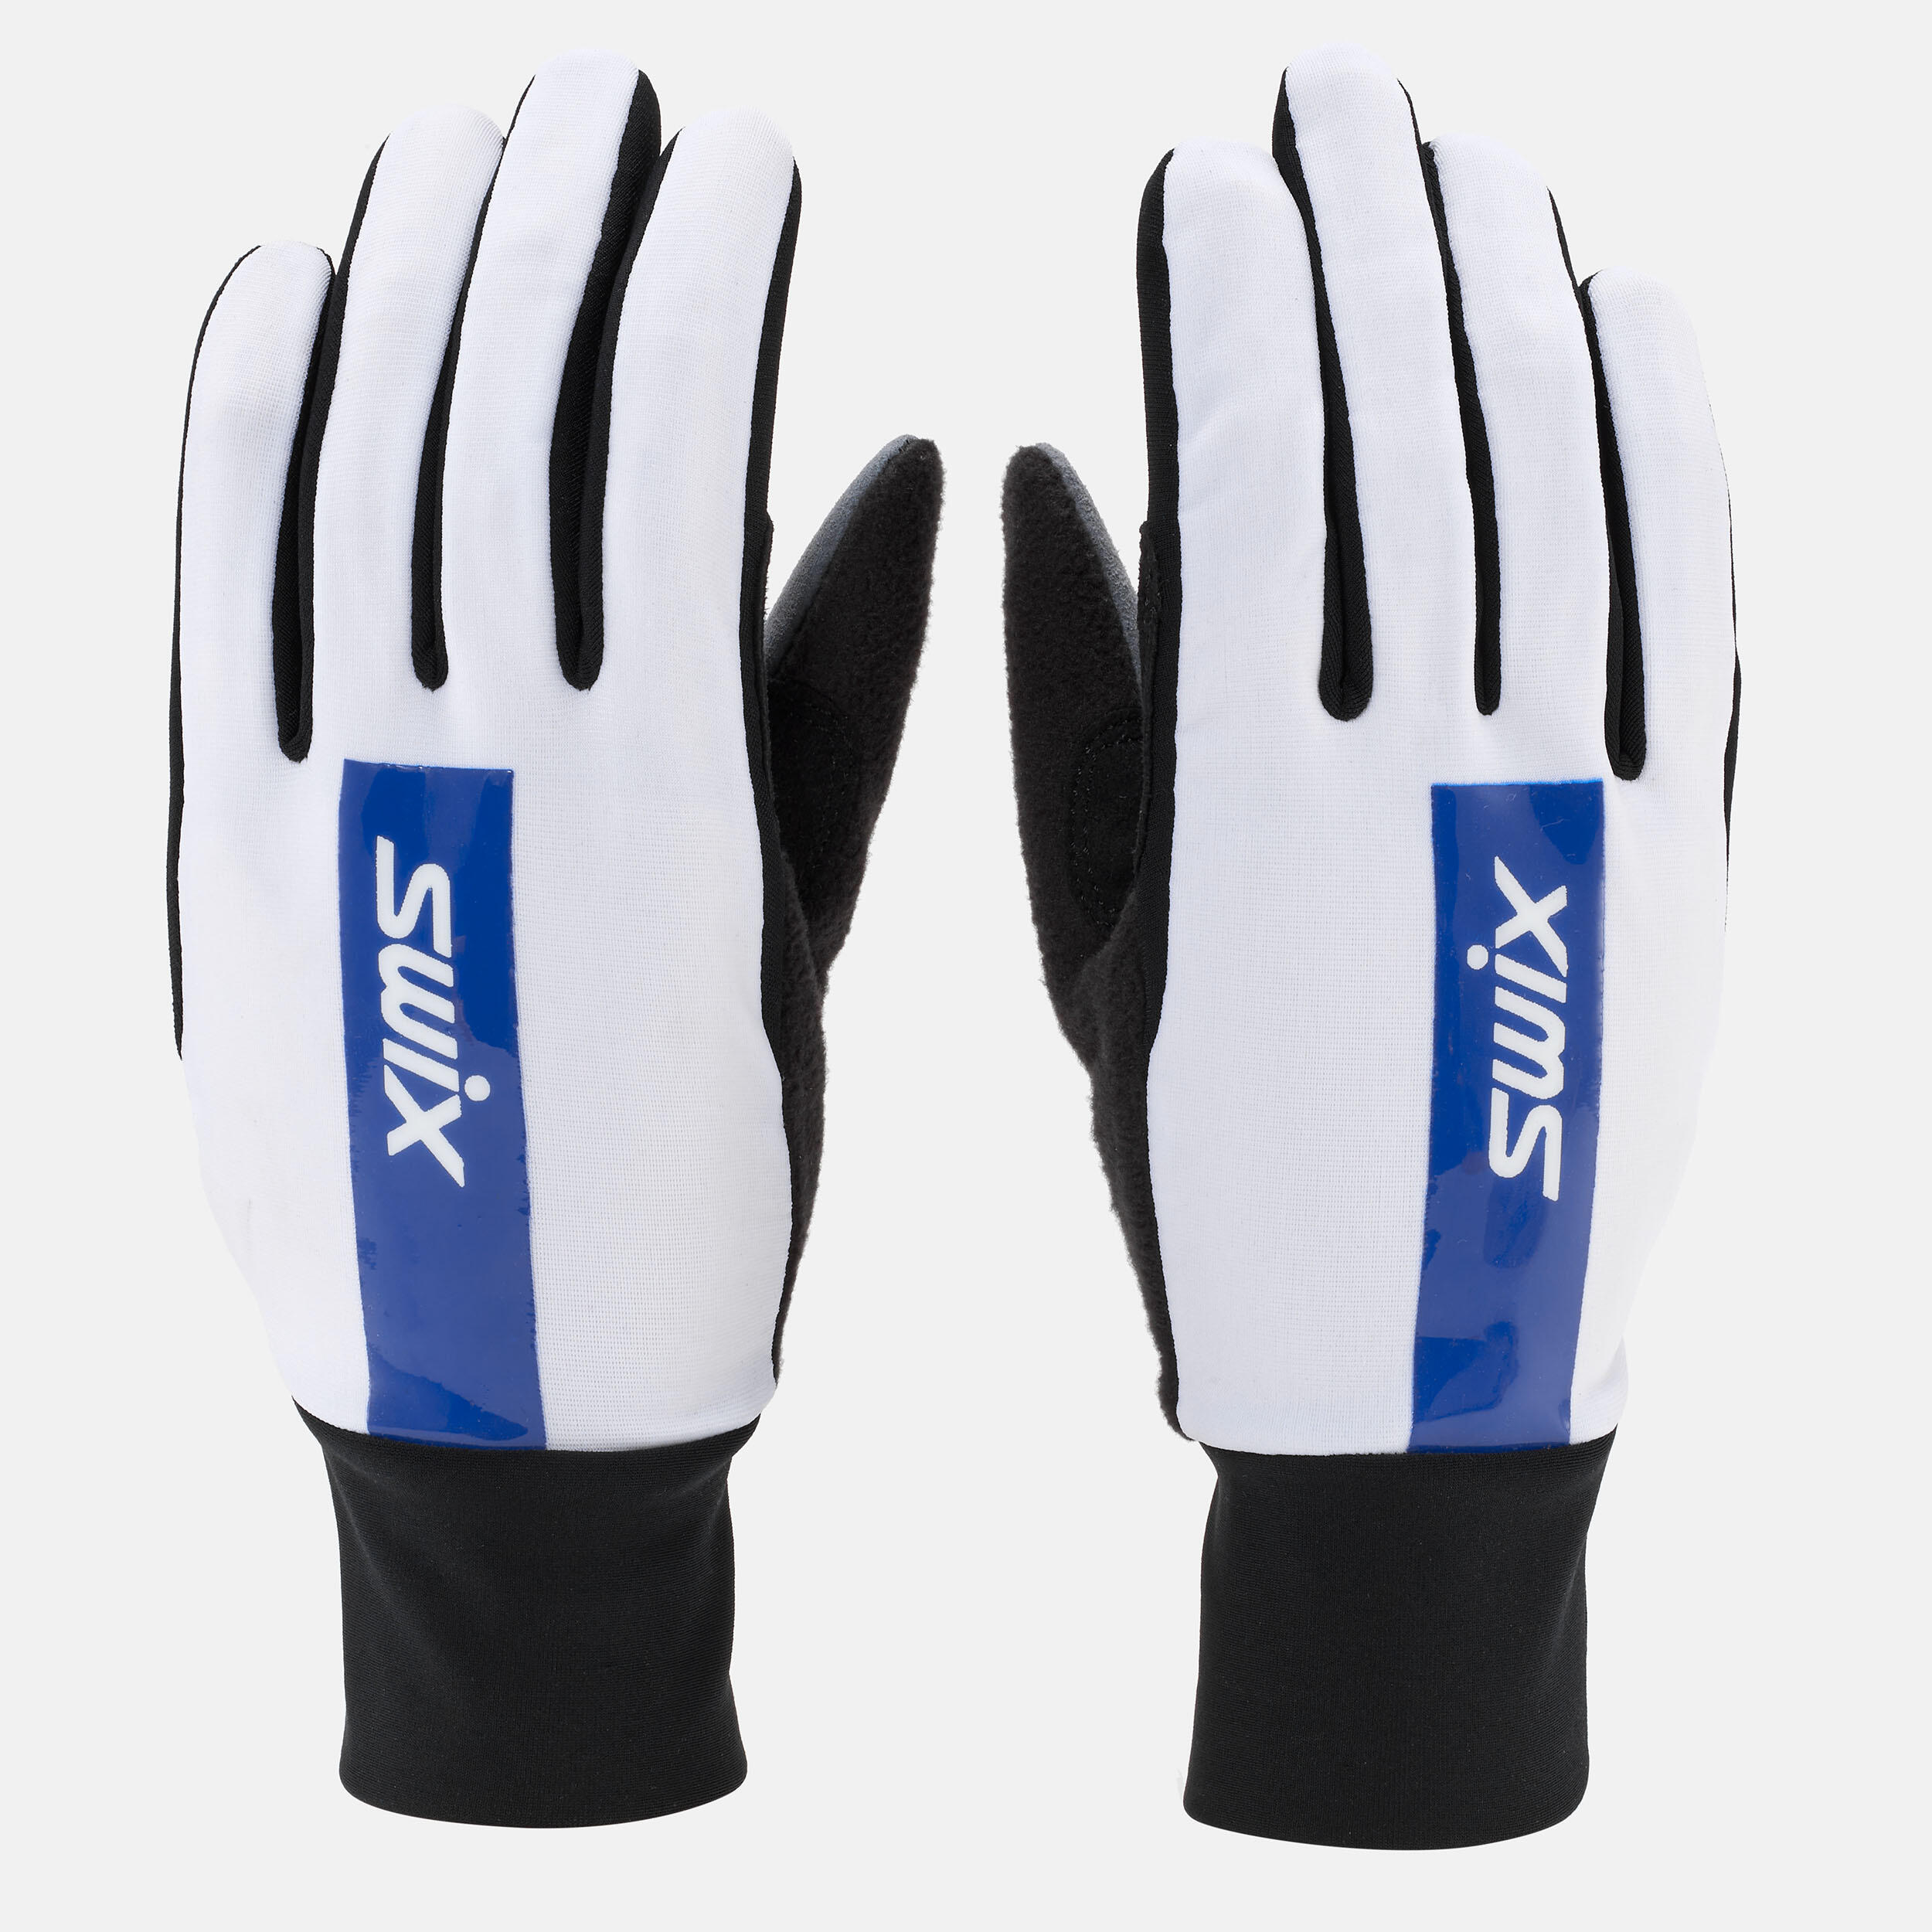 Focus SWIX technical cross-country skiing gloves 2/6